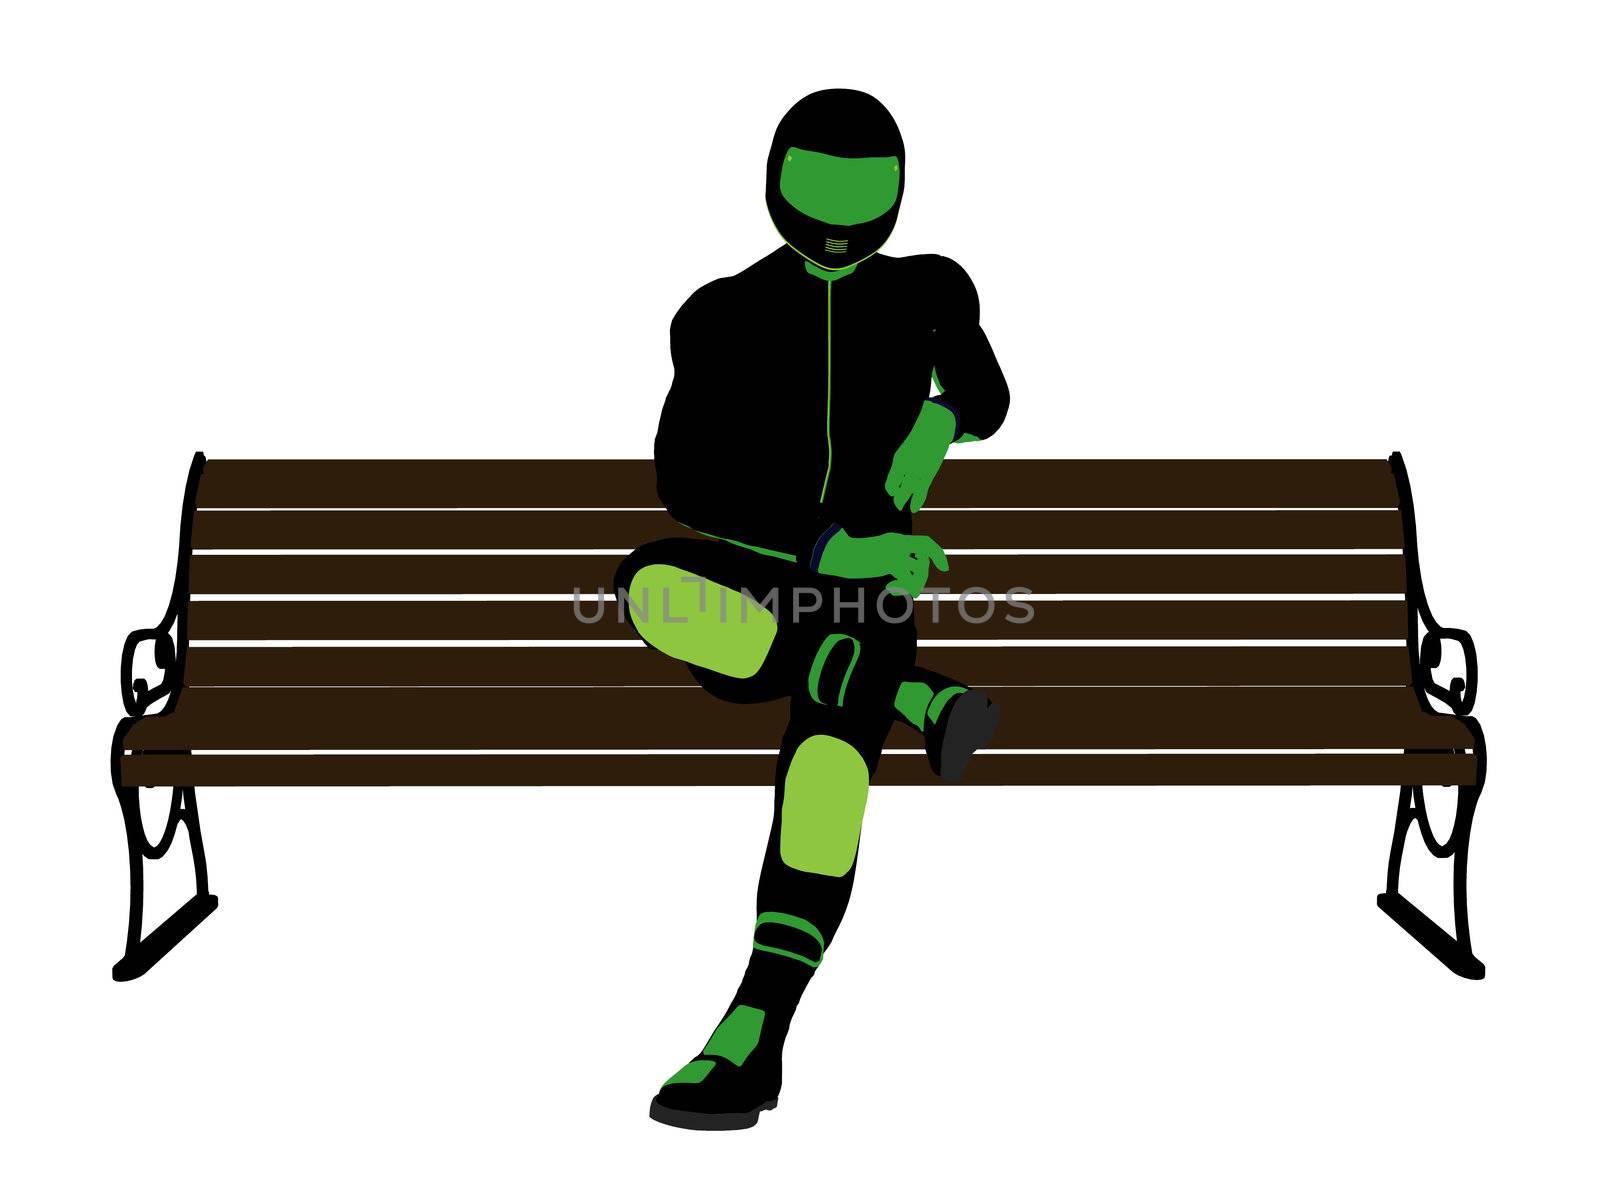 Male Motorcycle Rider sitting on a bench Silhouette by kathygold